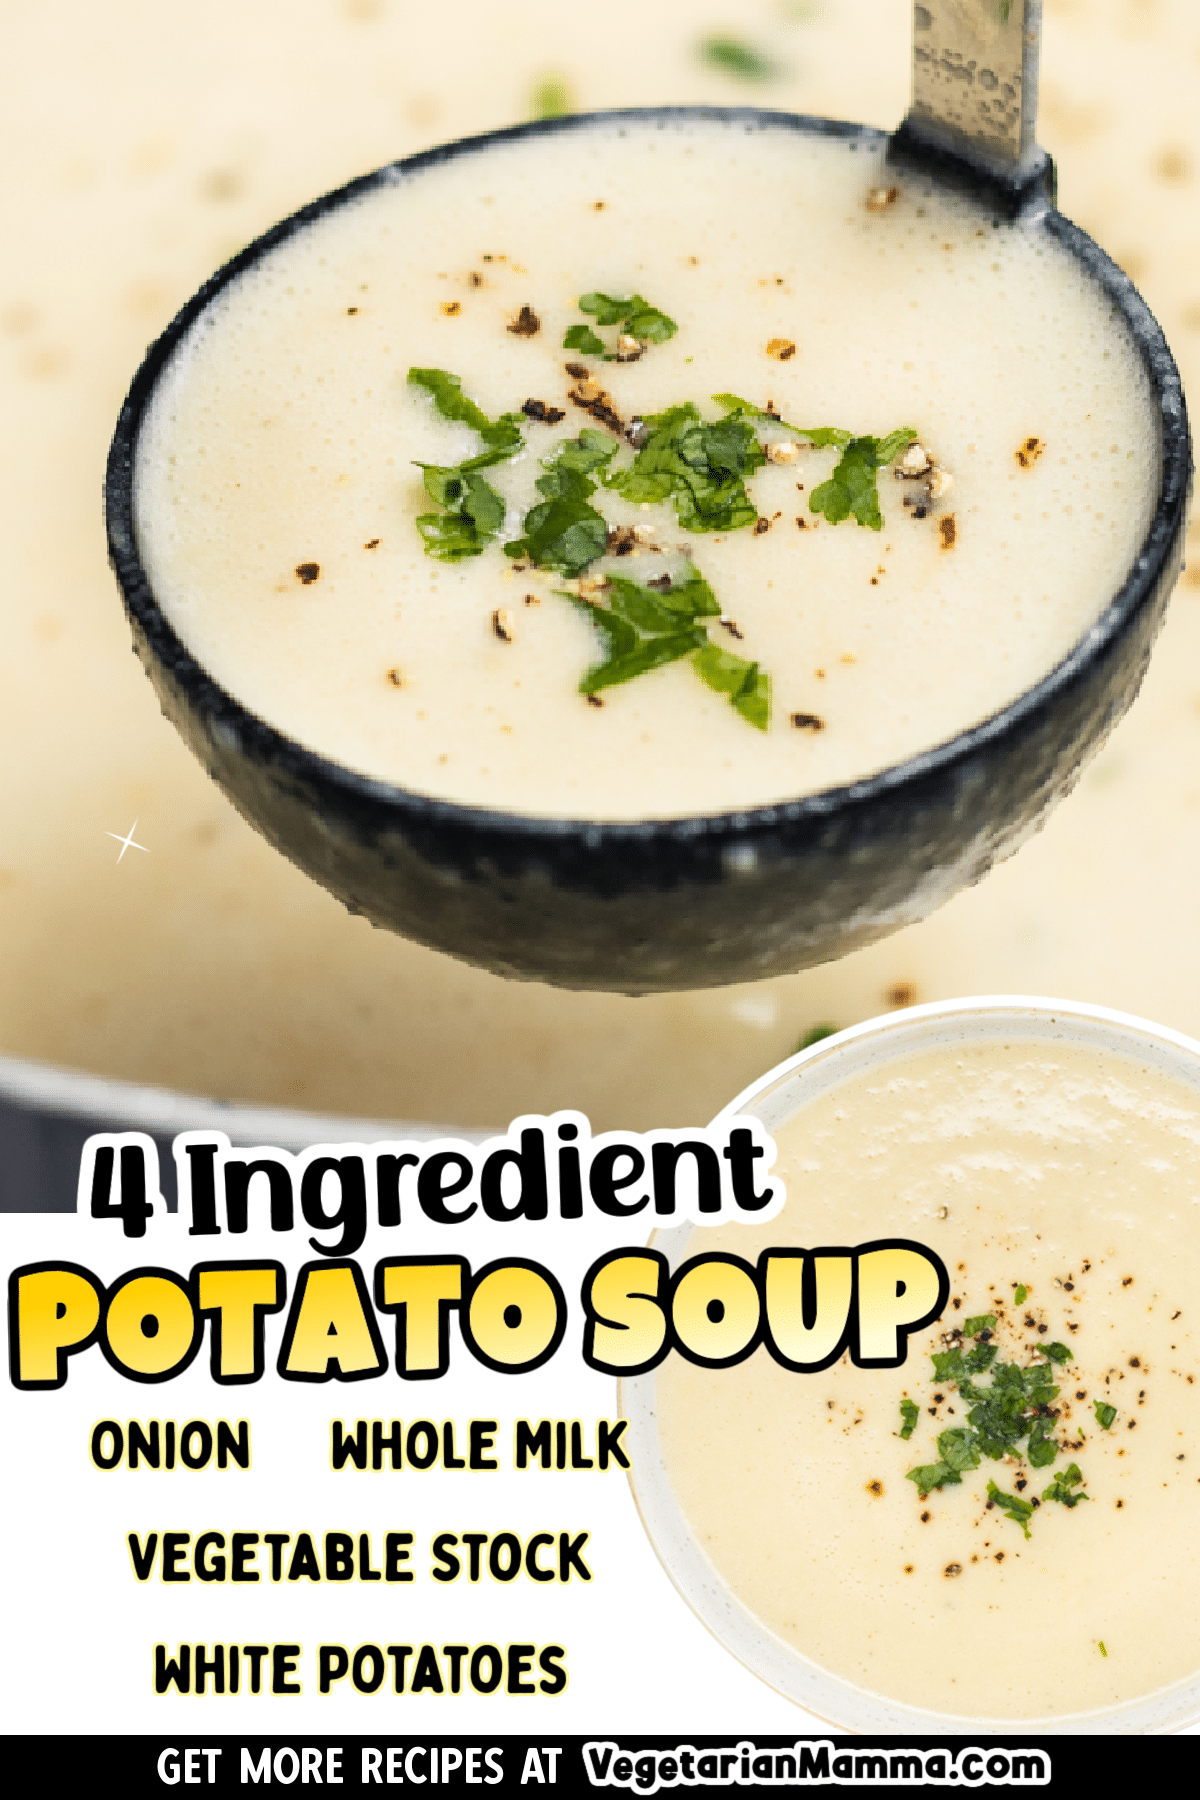 A 4 Ingredient Potato Soup Recipe that's ready in about 40 minutes! This simple soup recipe will warm your belly with comforting flavors and textures, and it's so easy to make.